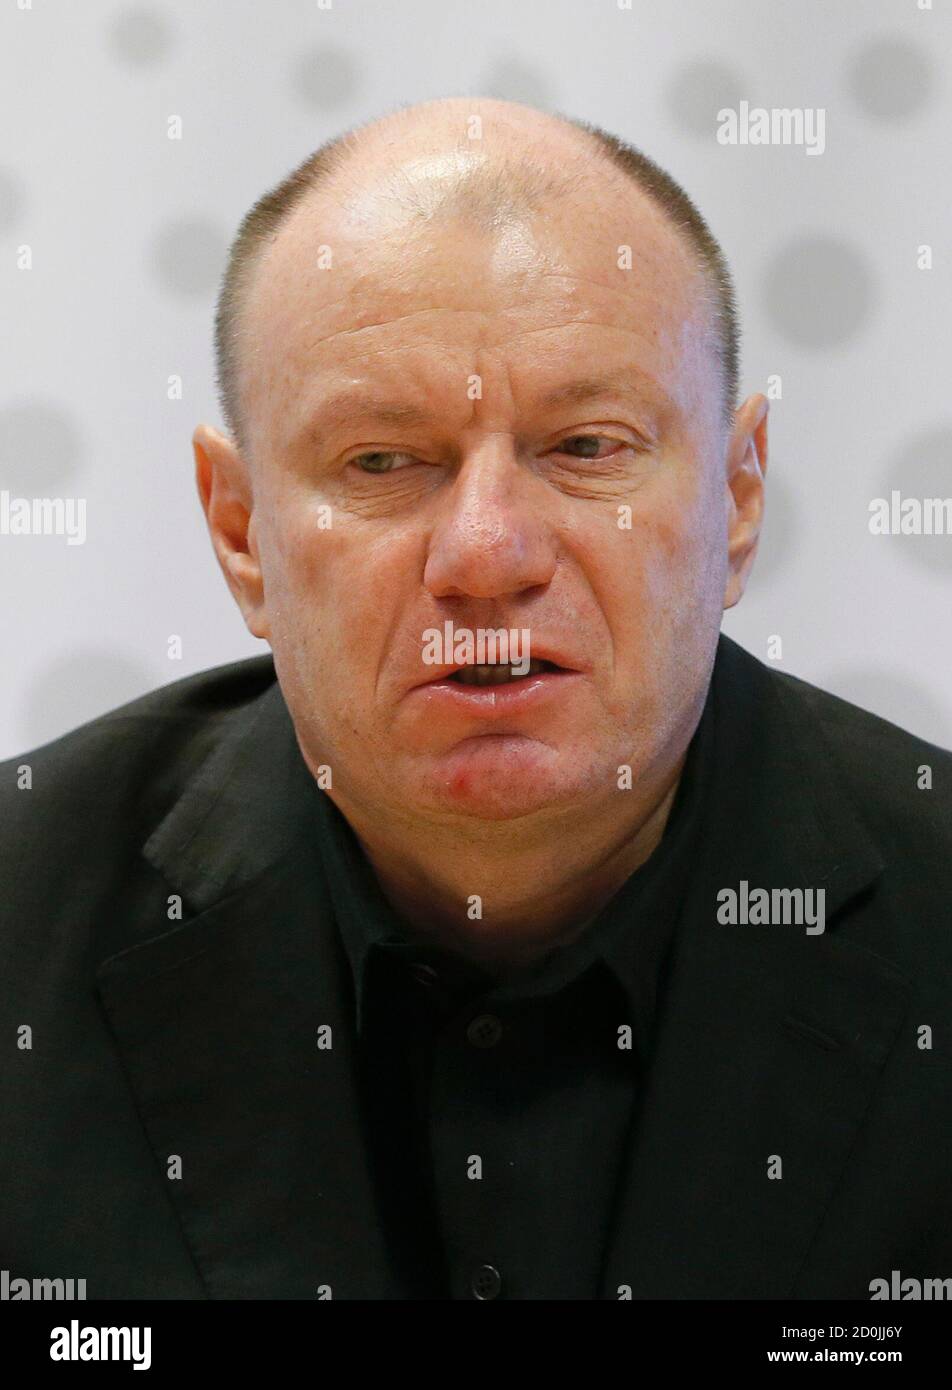 Vladimir Potanin, CEO and co-owner of Norilsk Nickel, speaks as he attends the Reuters Russia Investment Summit in Moscow September 23, 2014. REUTERS/Maxim Shemetov (RUSSIA - Tags: BUSINESS POLITICS HEADSHOT COMMODITIES) Stock Photo